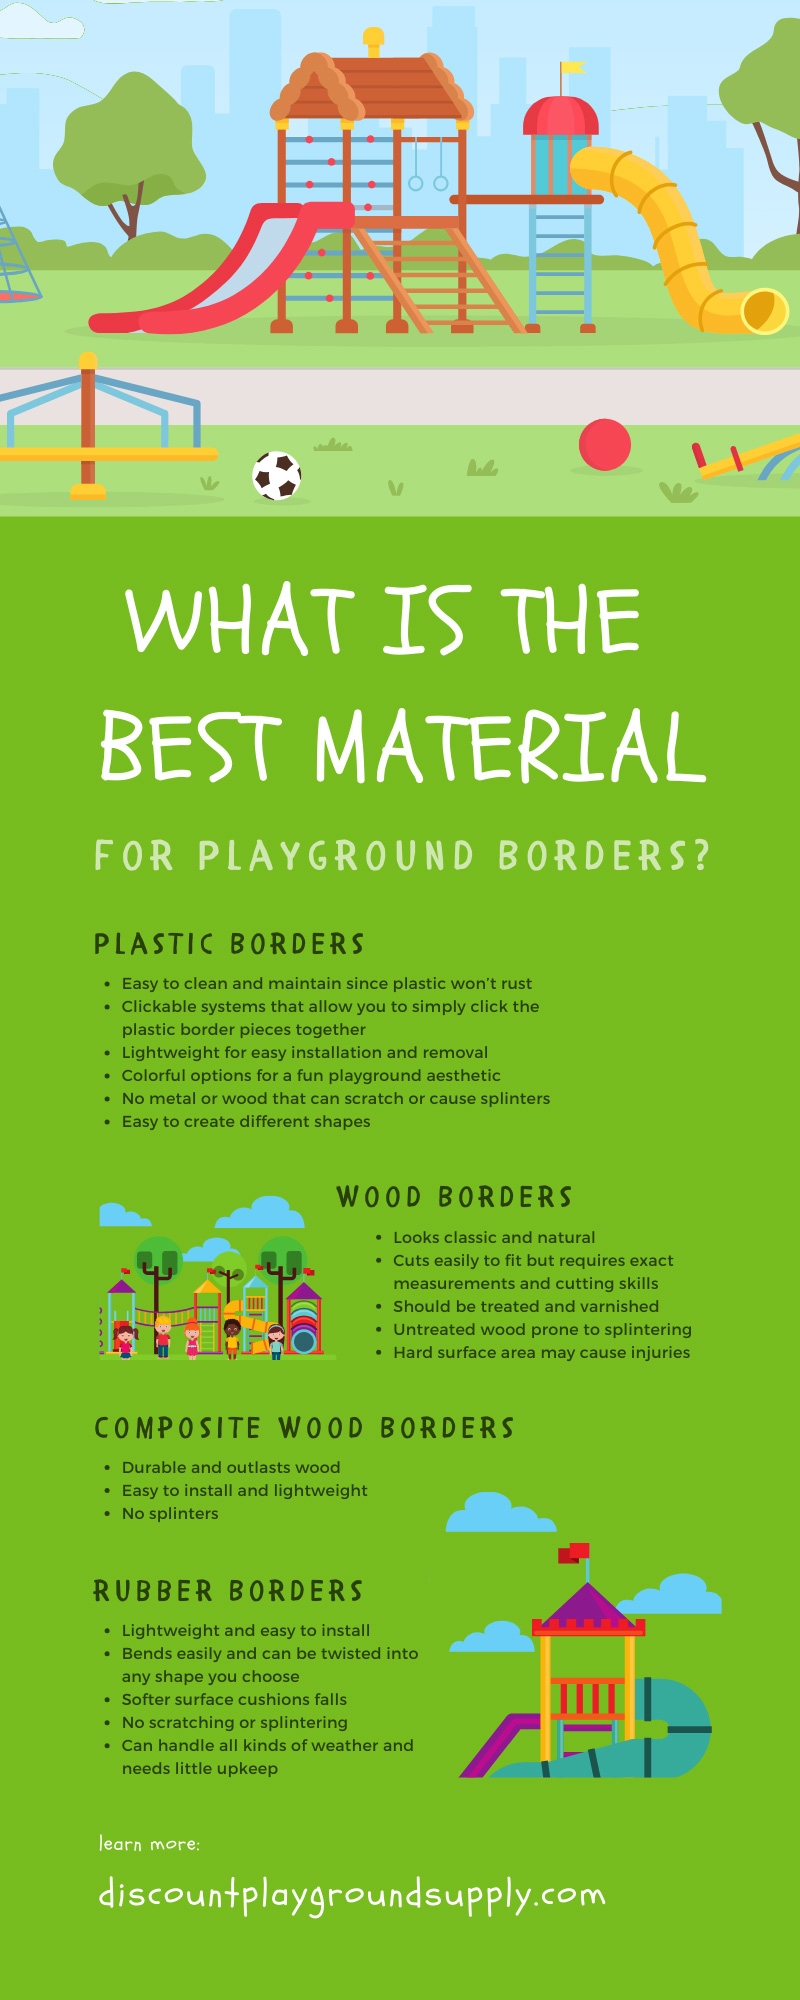 What Is the Best Material for Playground Borders?